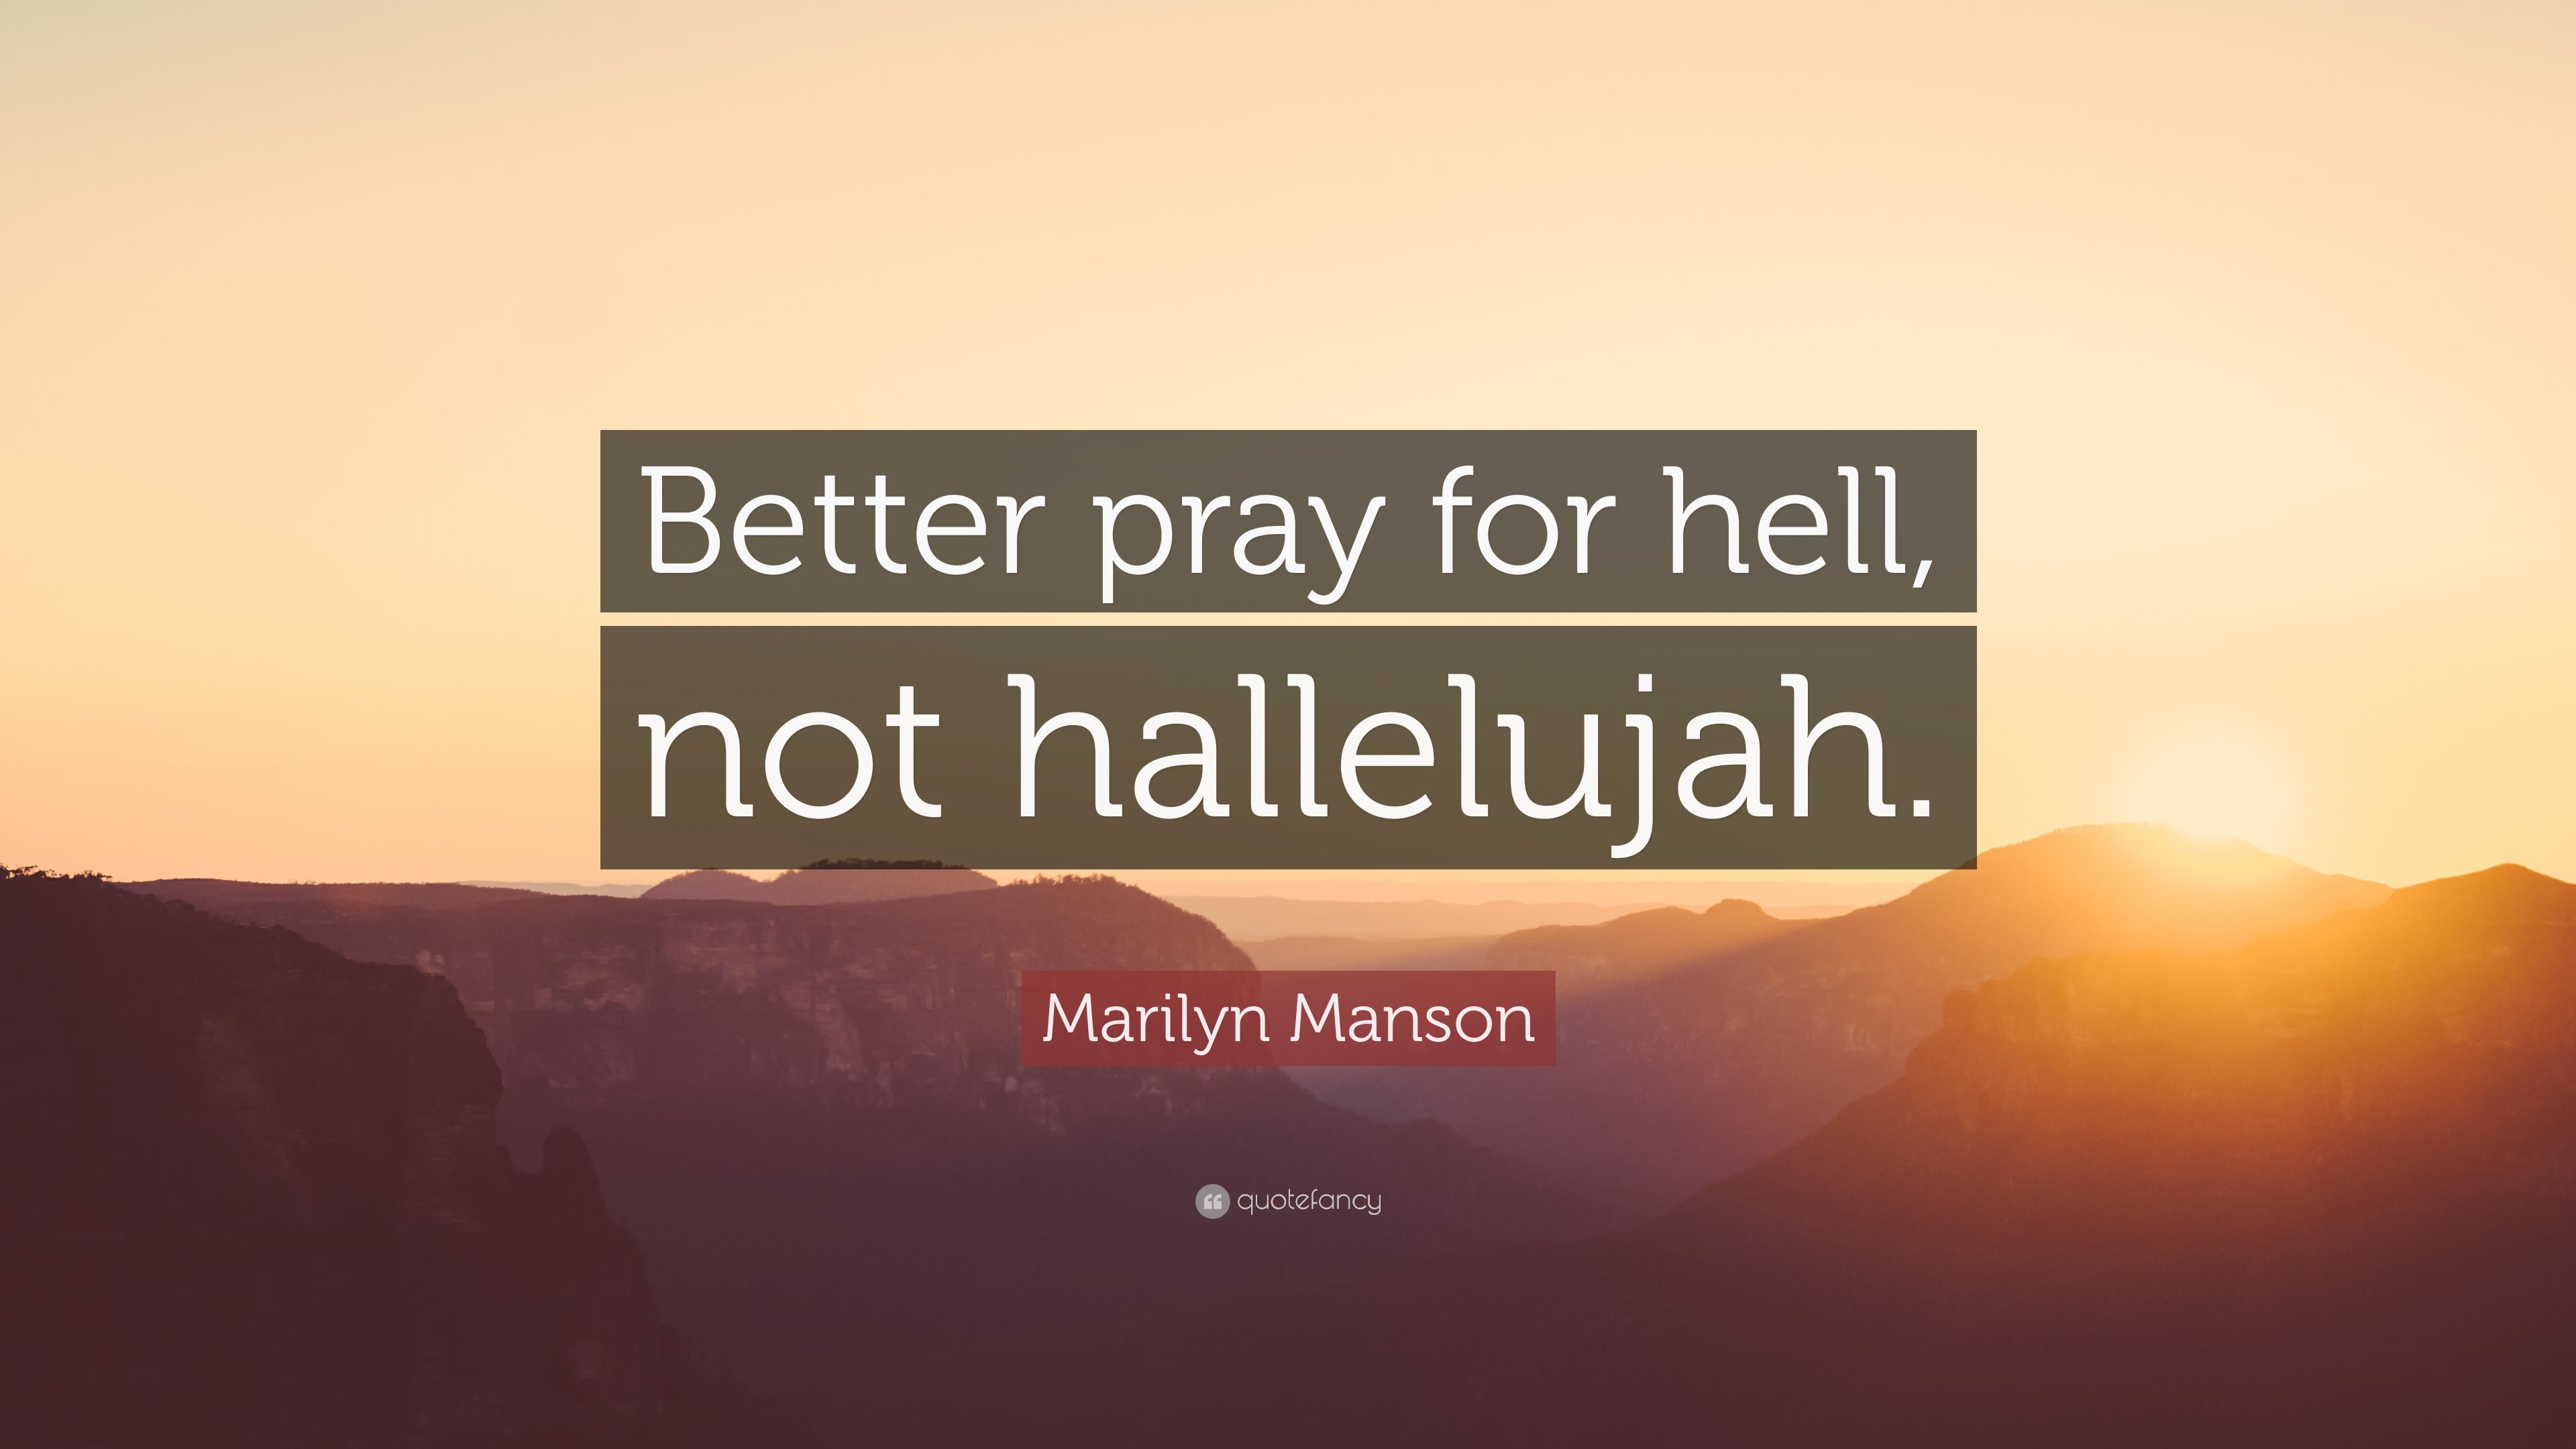 Marilyn Manson Quote: “Better pray for hell, not hallelujah.” (12 wallpaper)